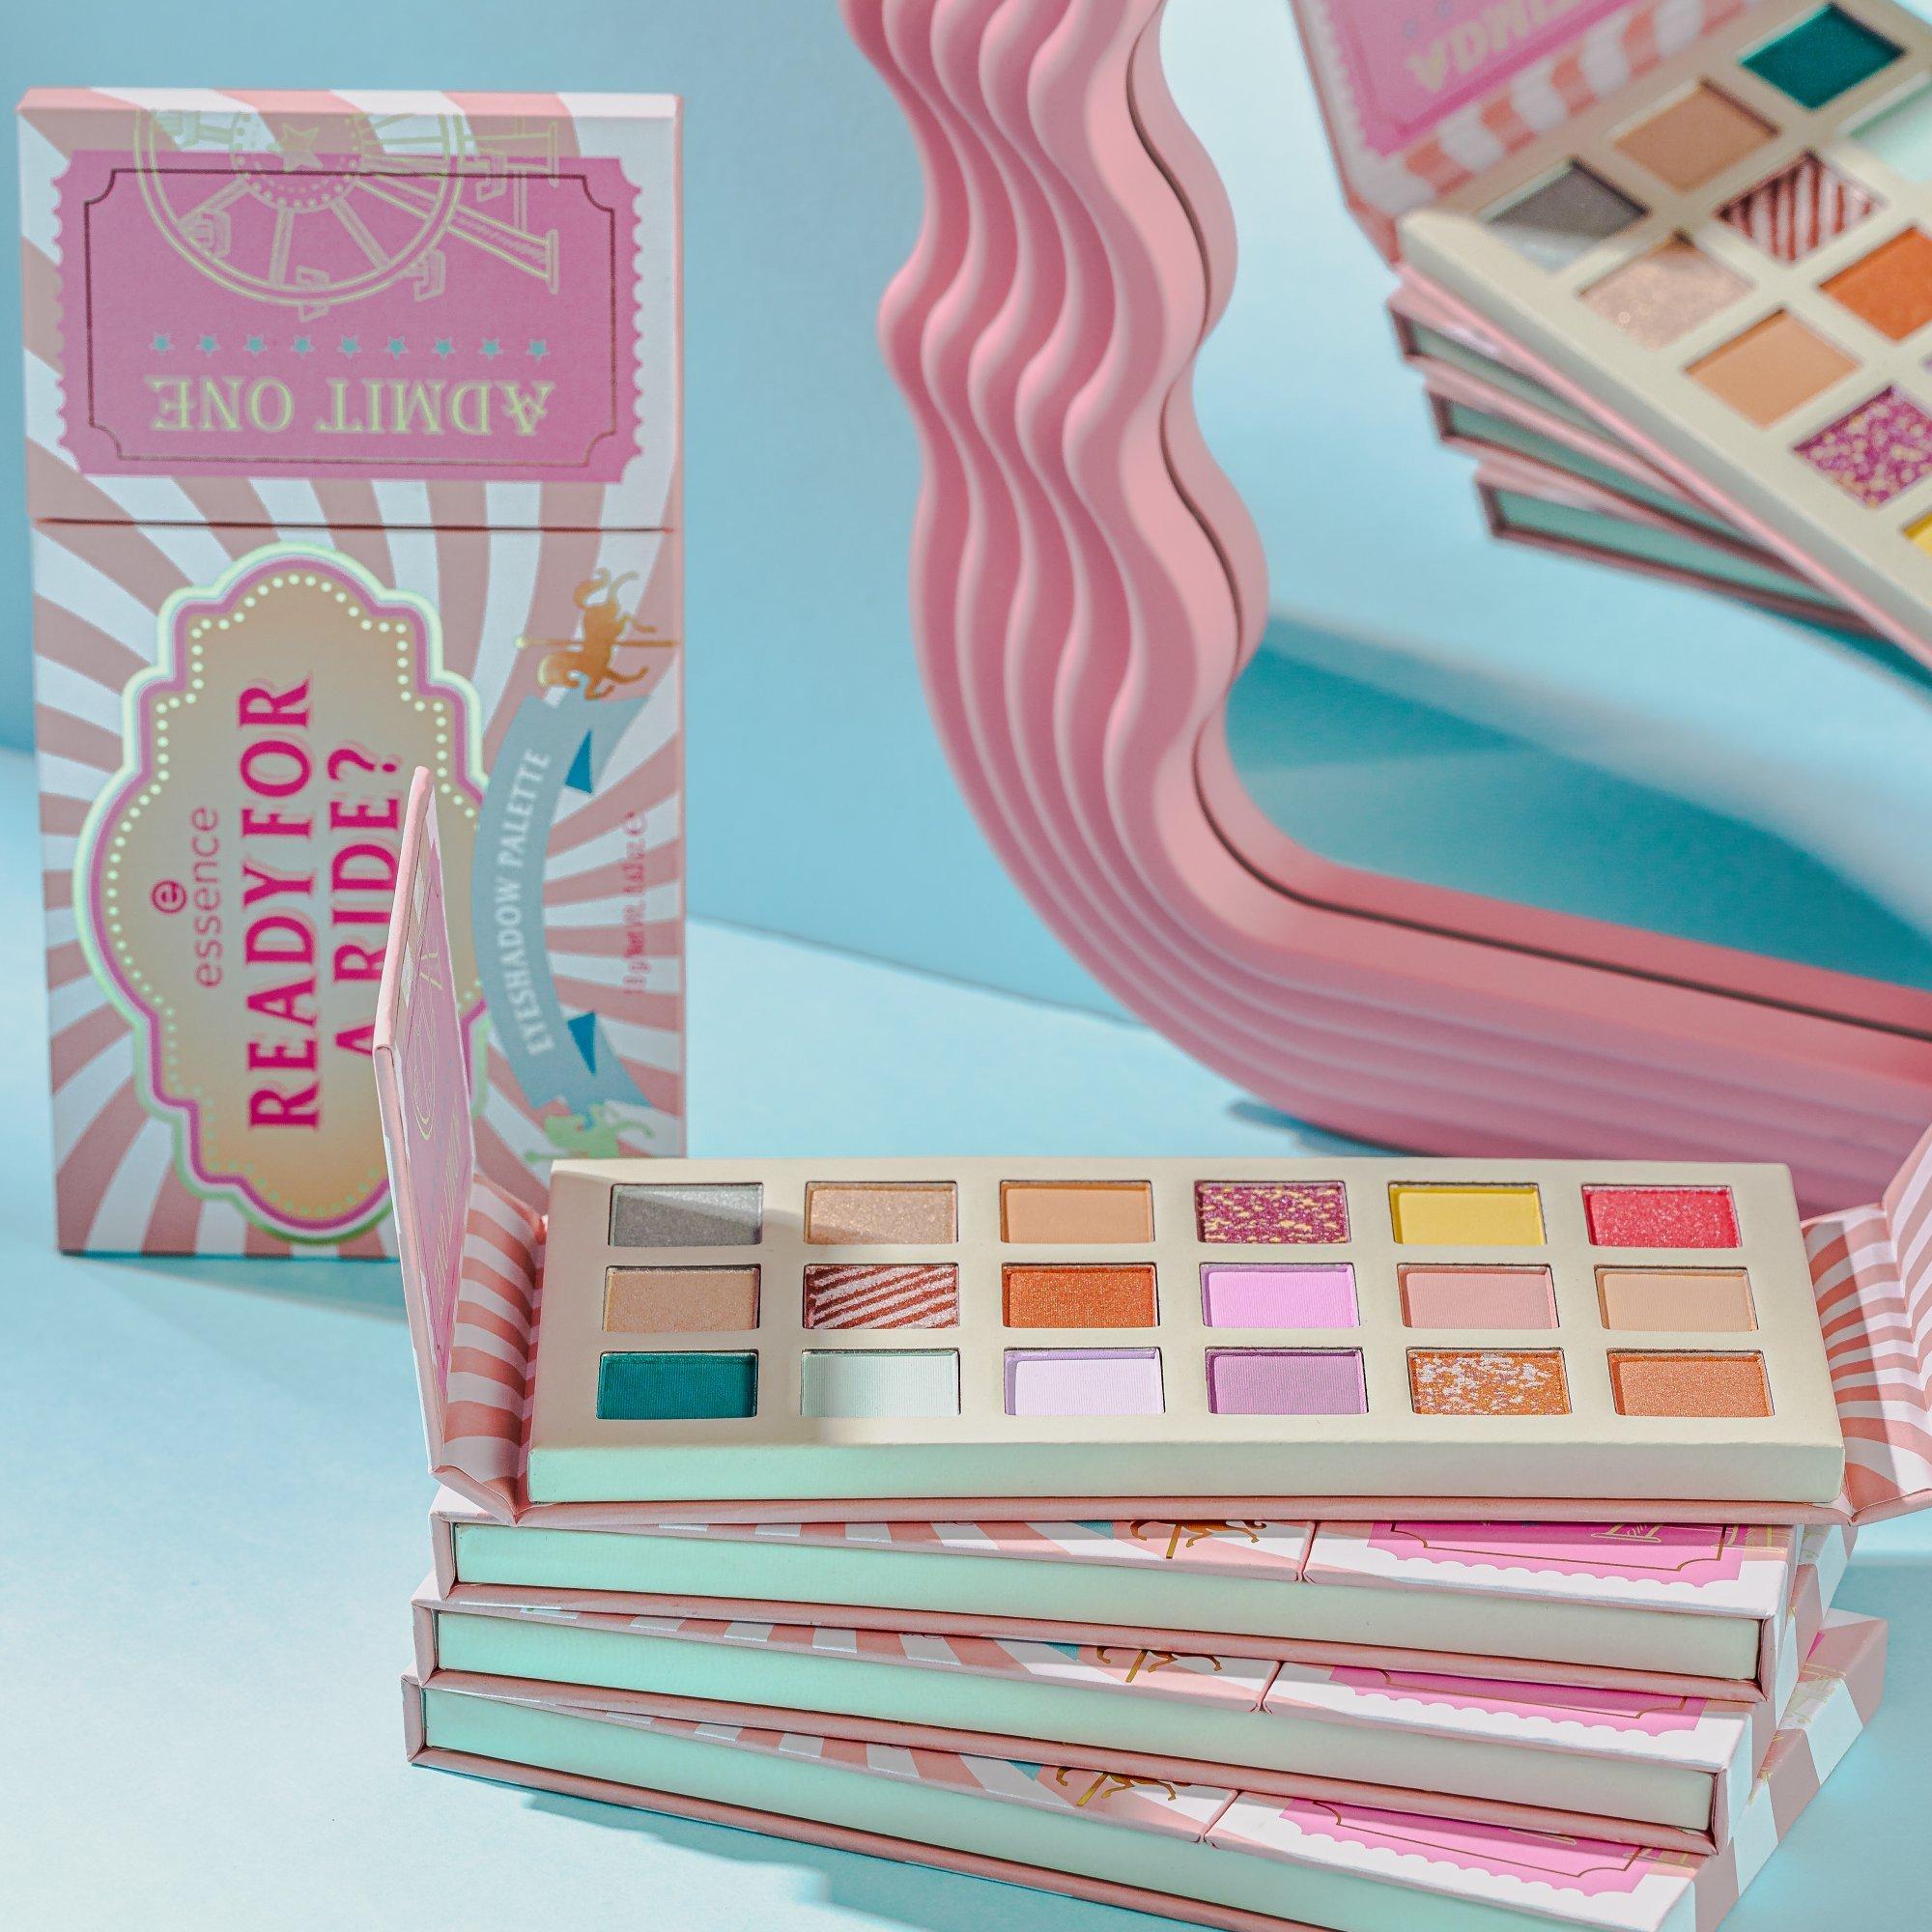 Buy essence EYESHADOW PALETTE Ride For Fun A RIDE? A online READY Ticket FOR